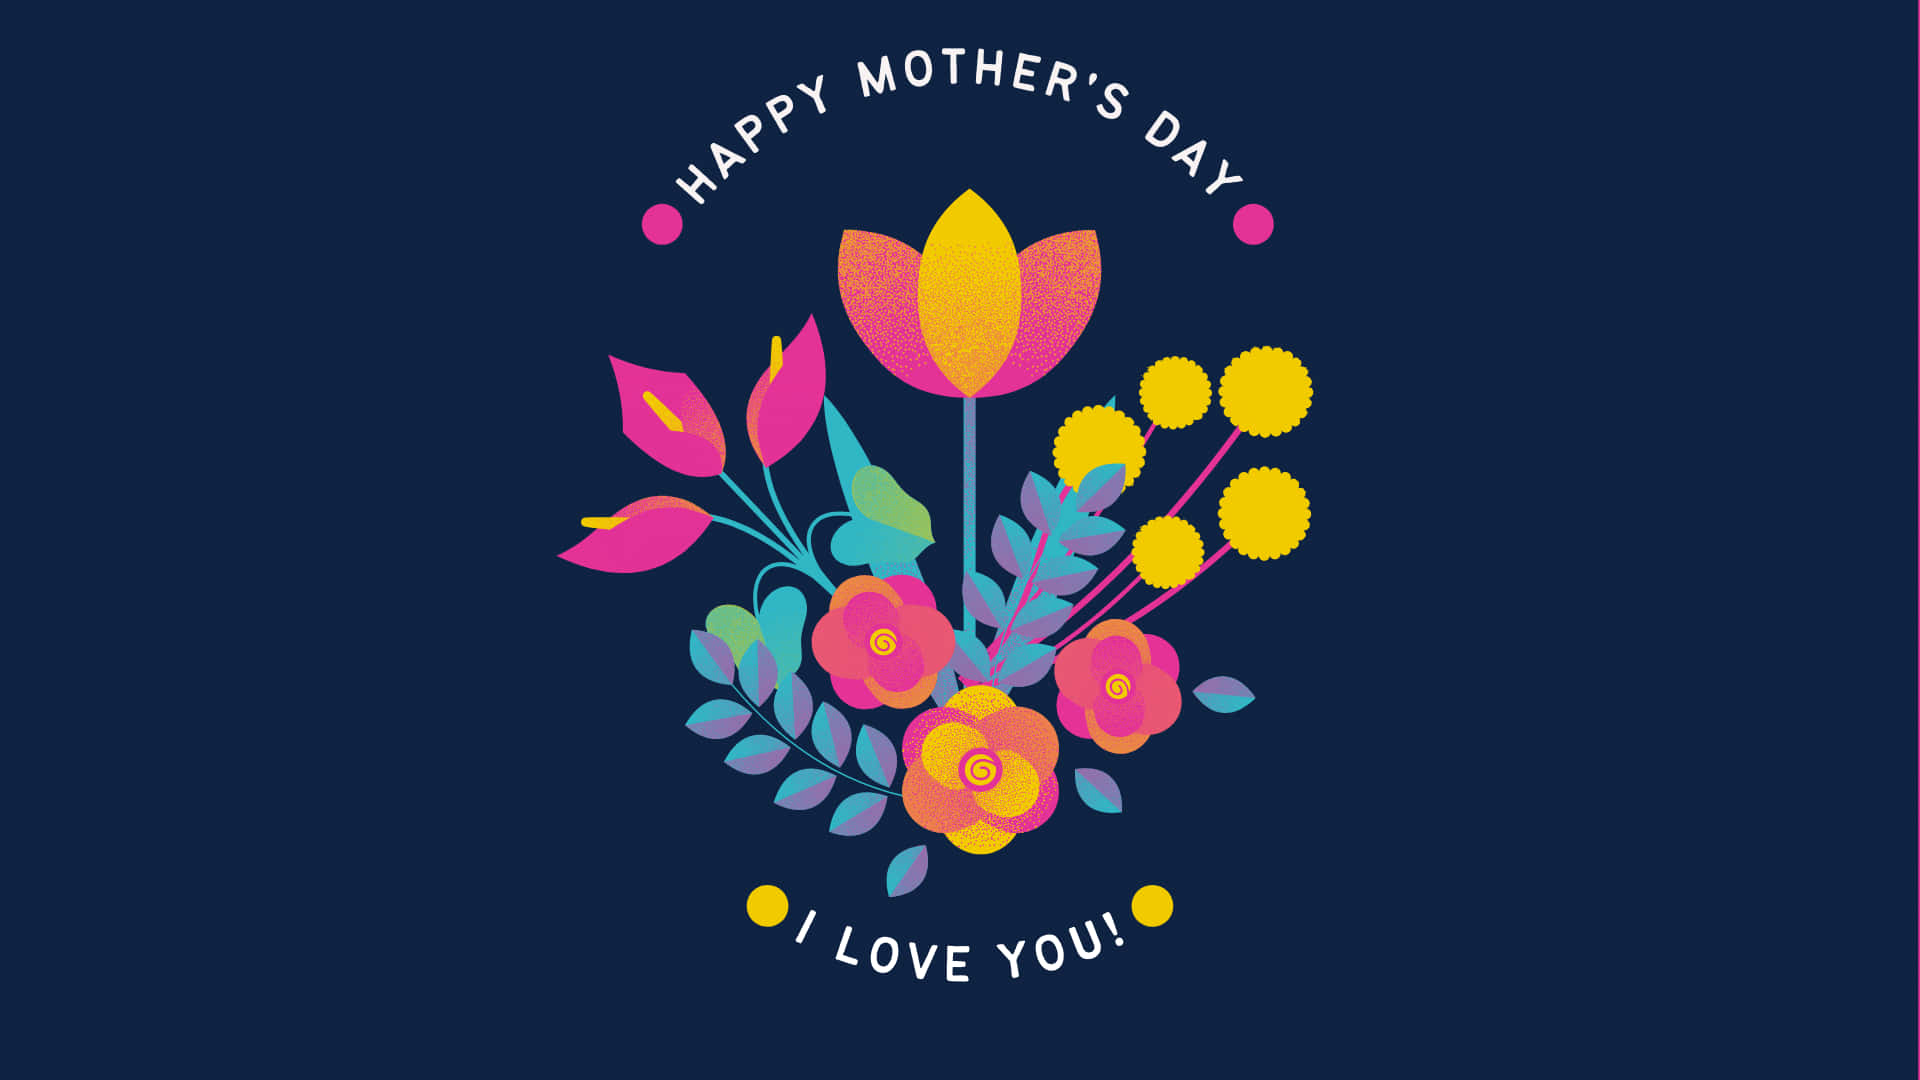 Celebrate this Mother's Day with Love! Wallpaper